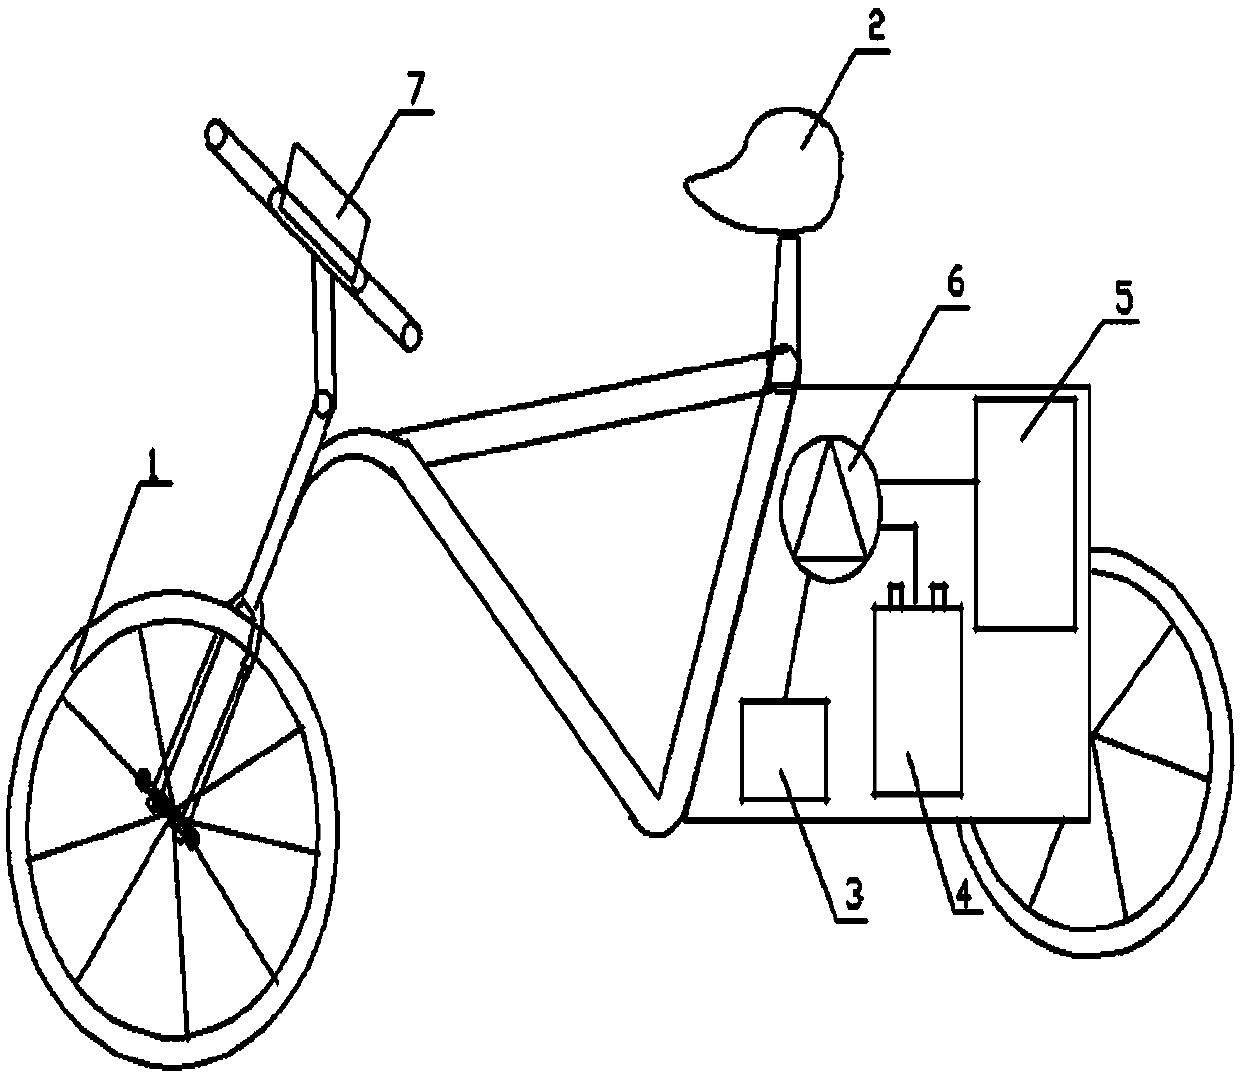 Extended-range electric bicycle